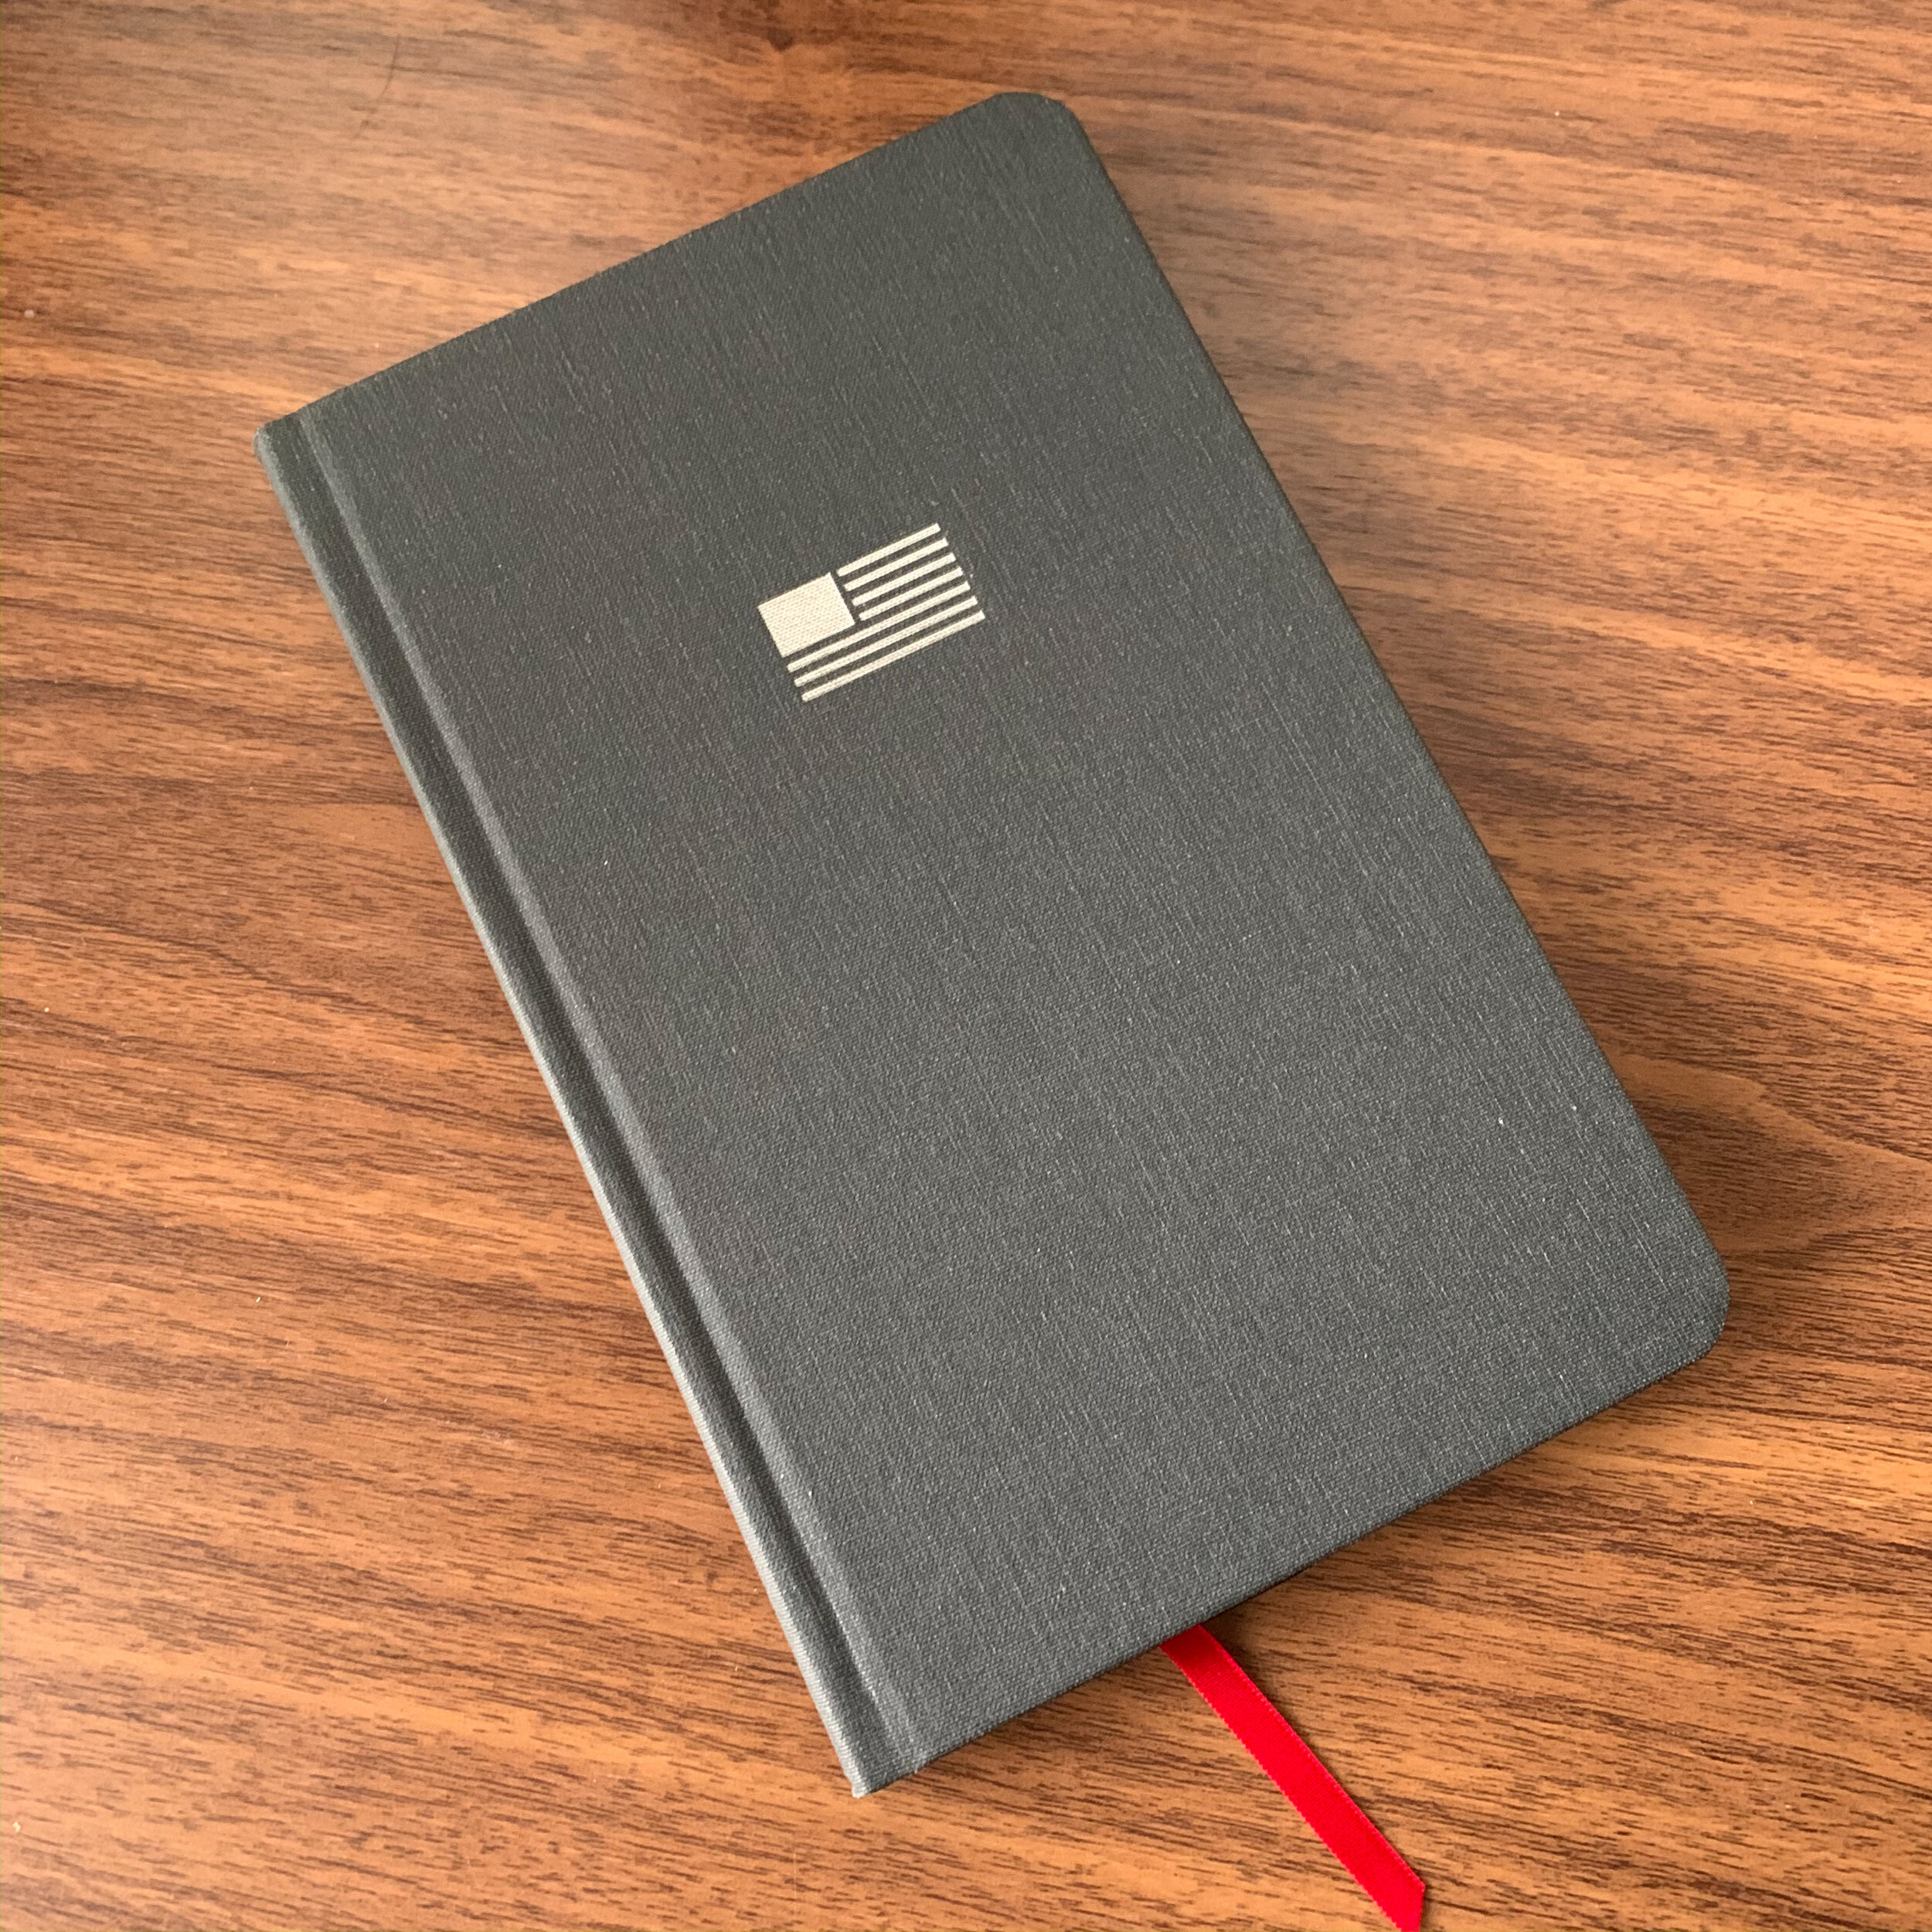 Notebook Review: Oxford USA Hardcover Journal — The Gentleman Stationer